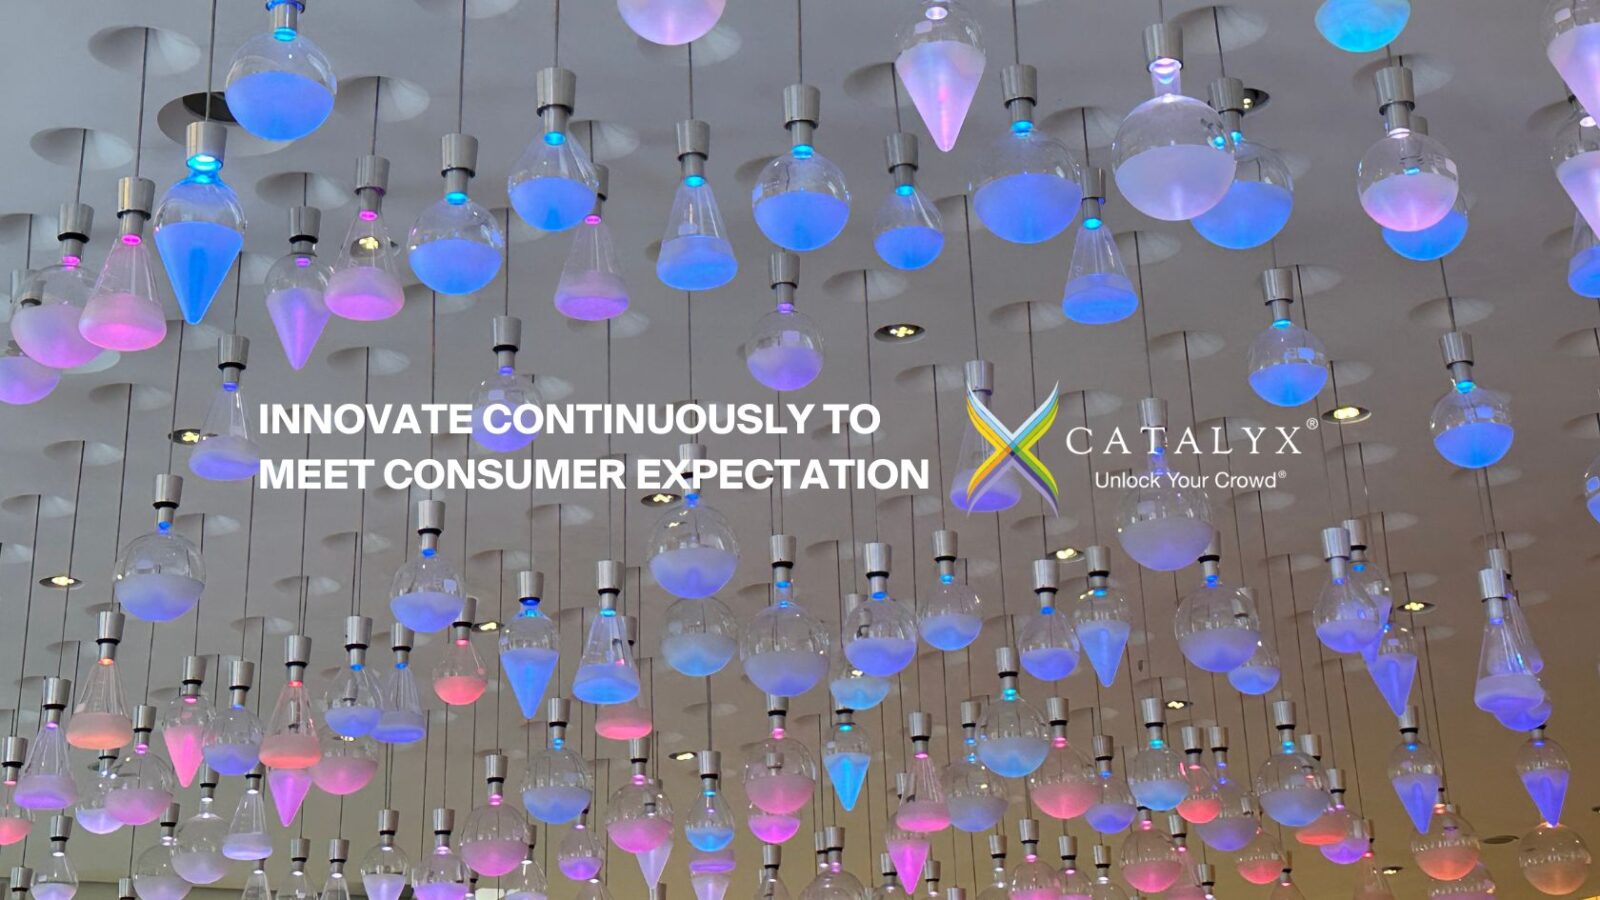 Innovate continuously to meet consumer expectation, and Catalyx logo on an image of coloured lightbulbs